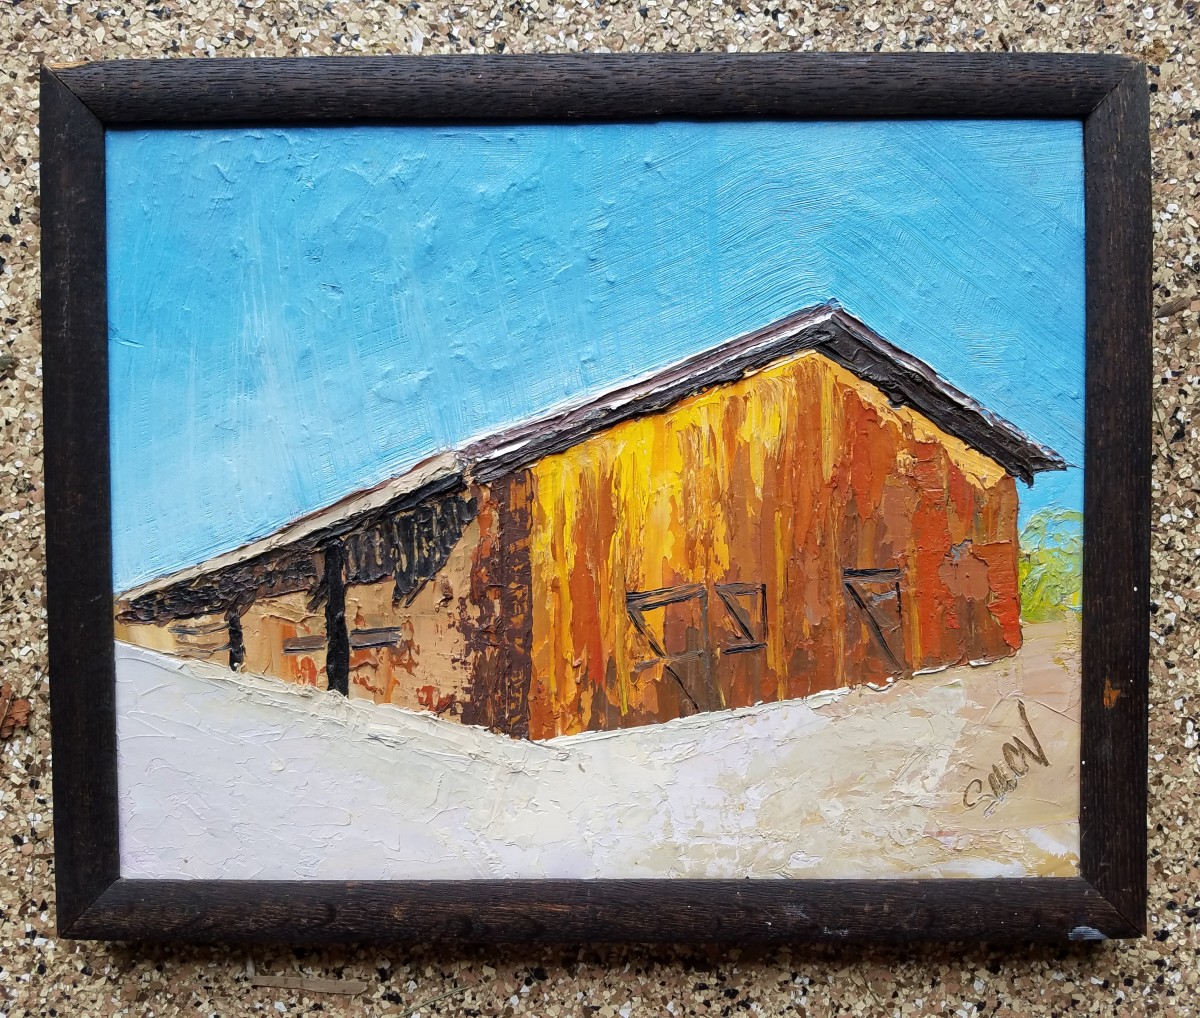 "Arboretum Barn" --where is this painting? by Barnlady 